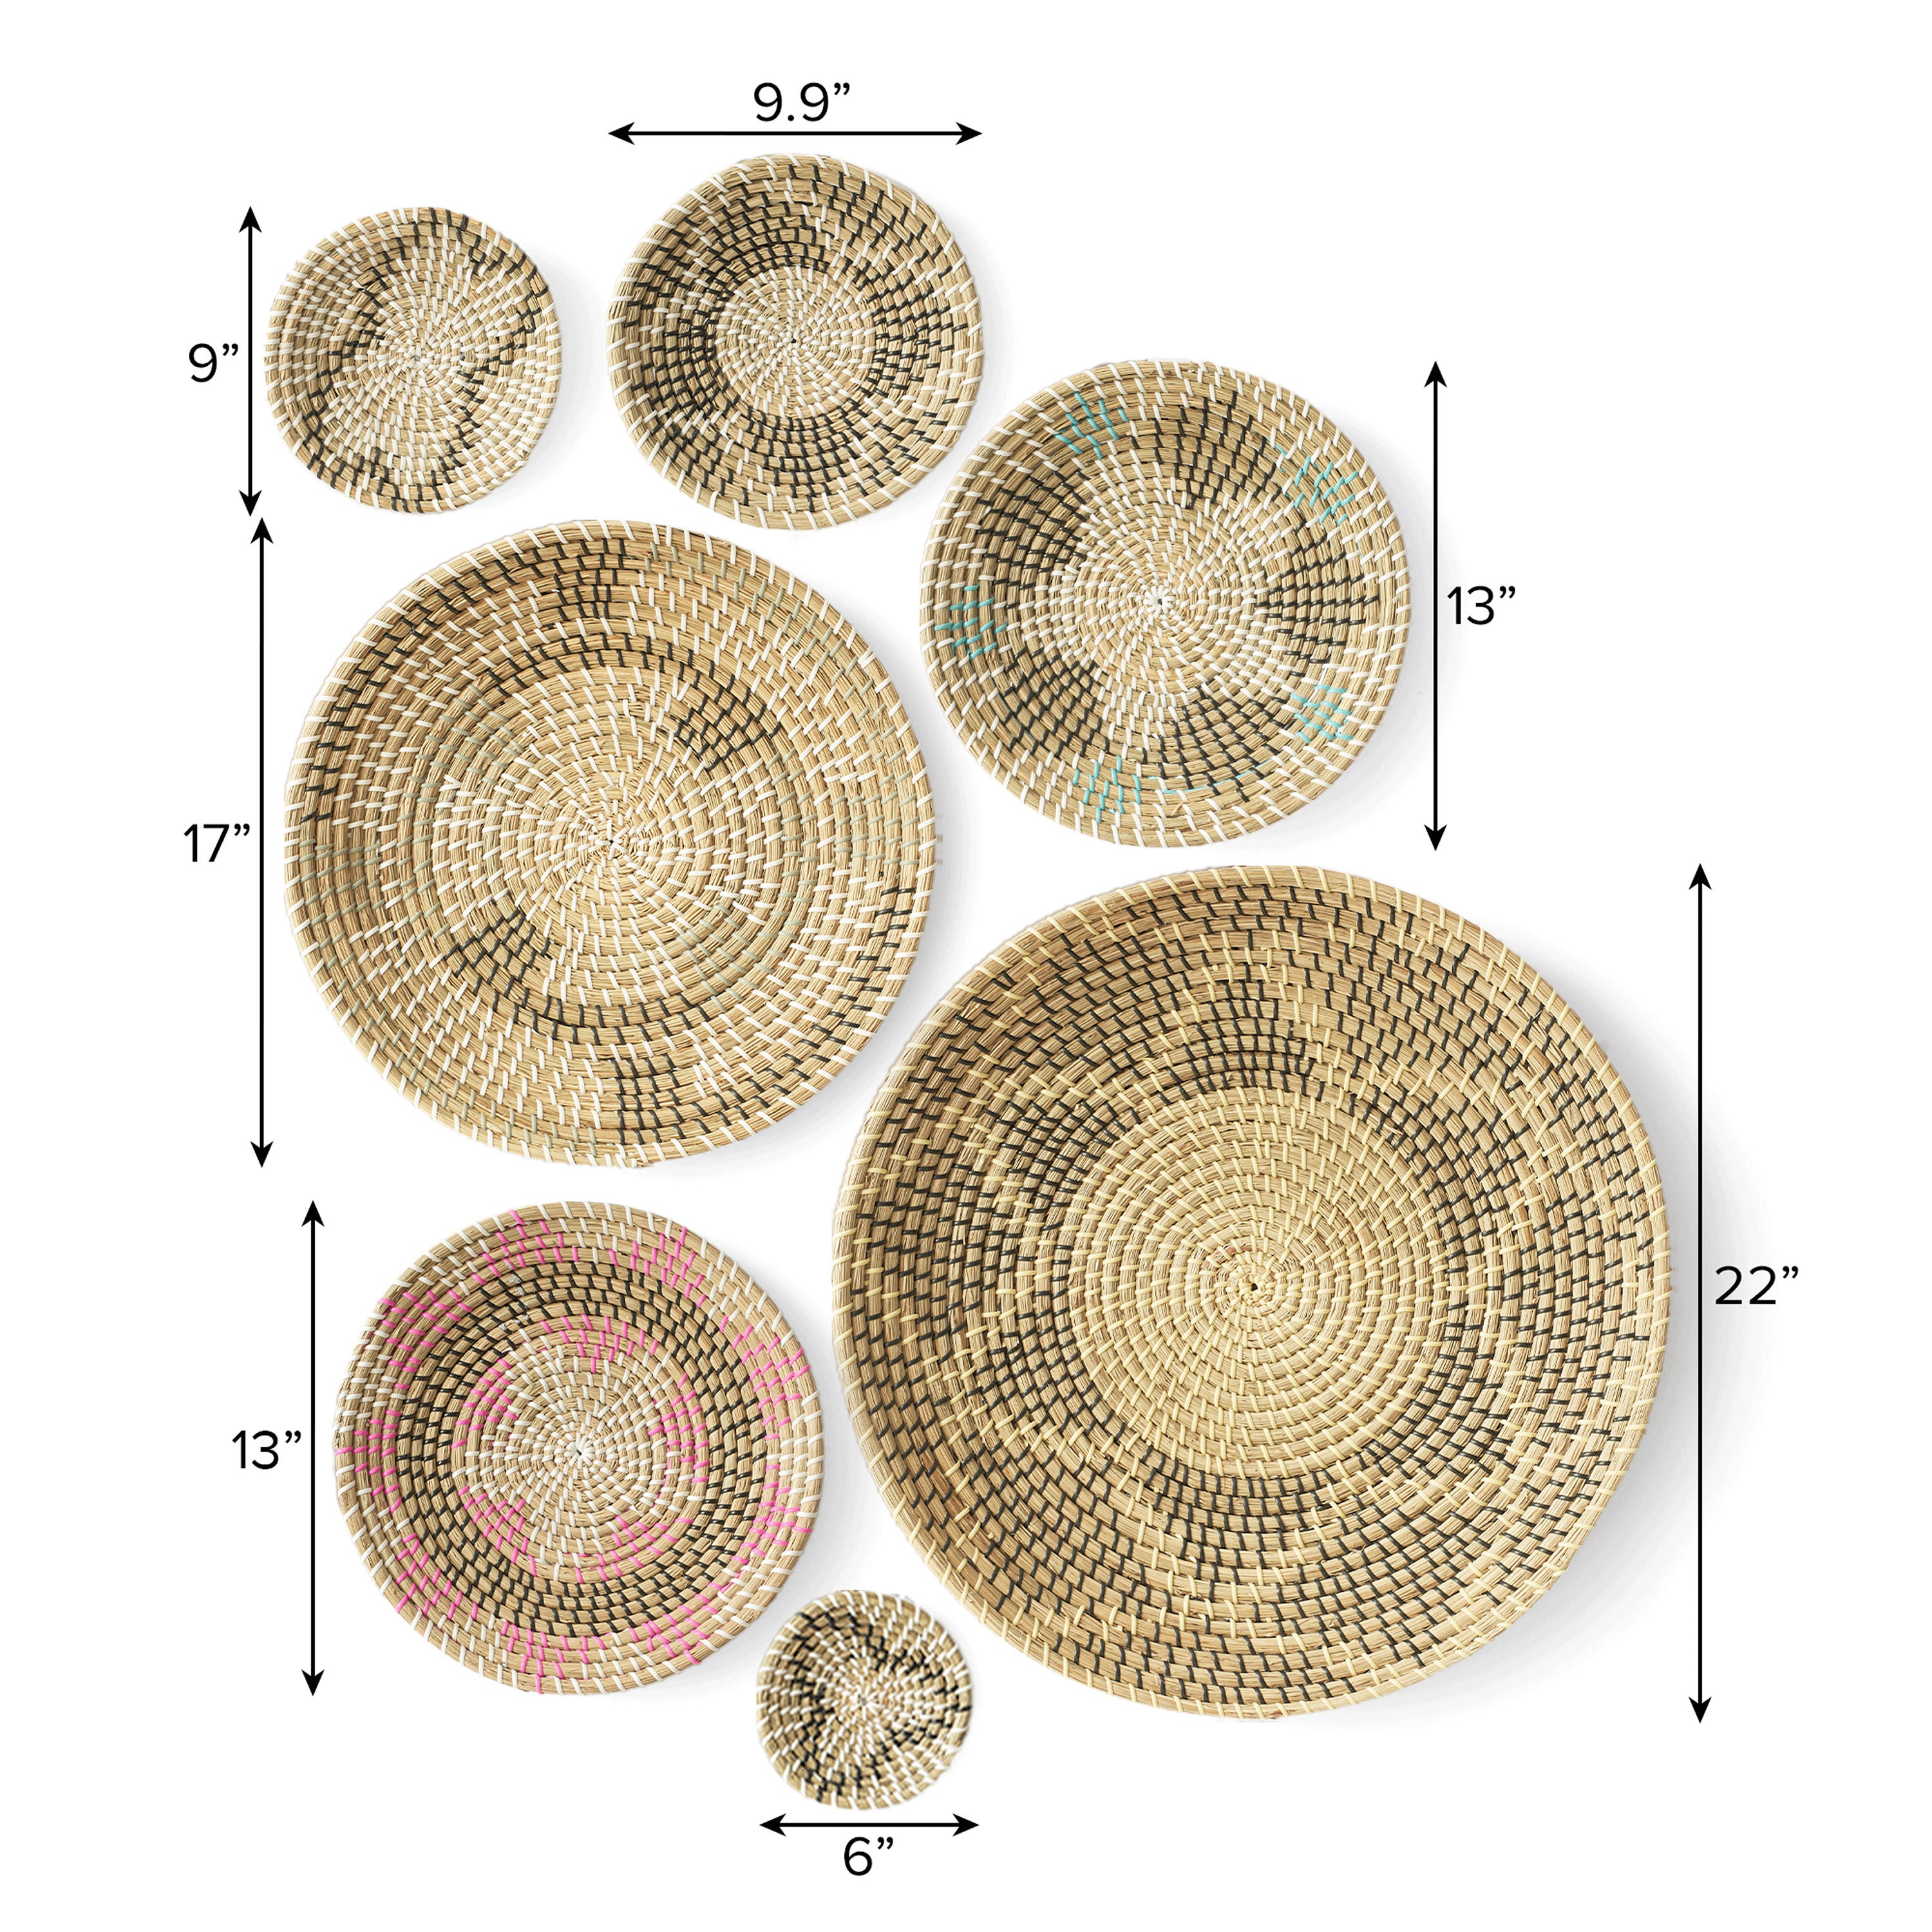 Artera Wicker Wall Basket Decor - Set of 4 Oversized, Hanging Natural Woven  Seagrass Flat Baskets, Round Boho Wall Basket Decor for Living Room or